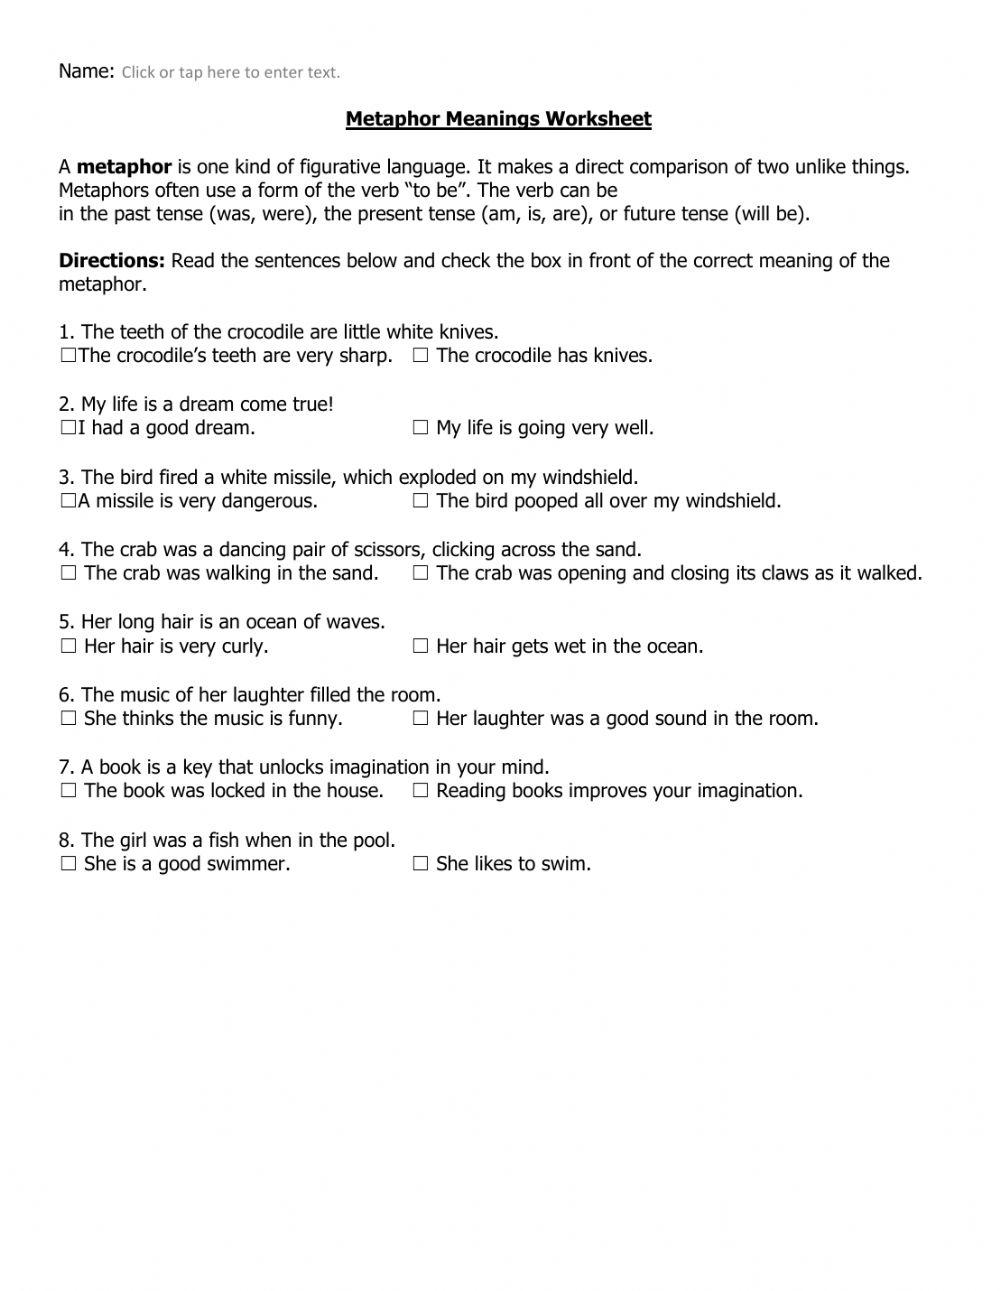 Metaphor Meaning Worksheet text only